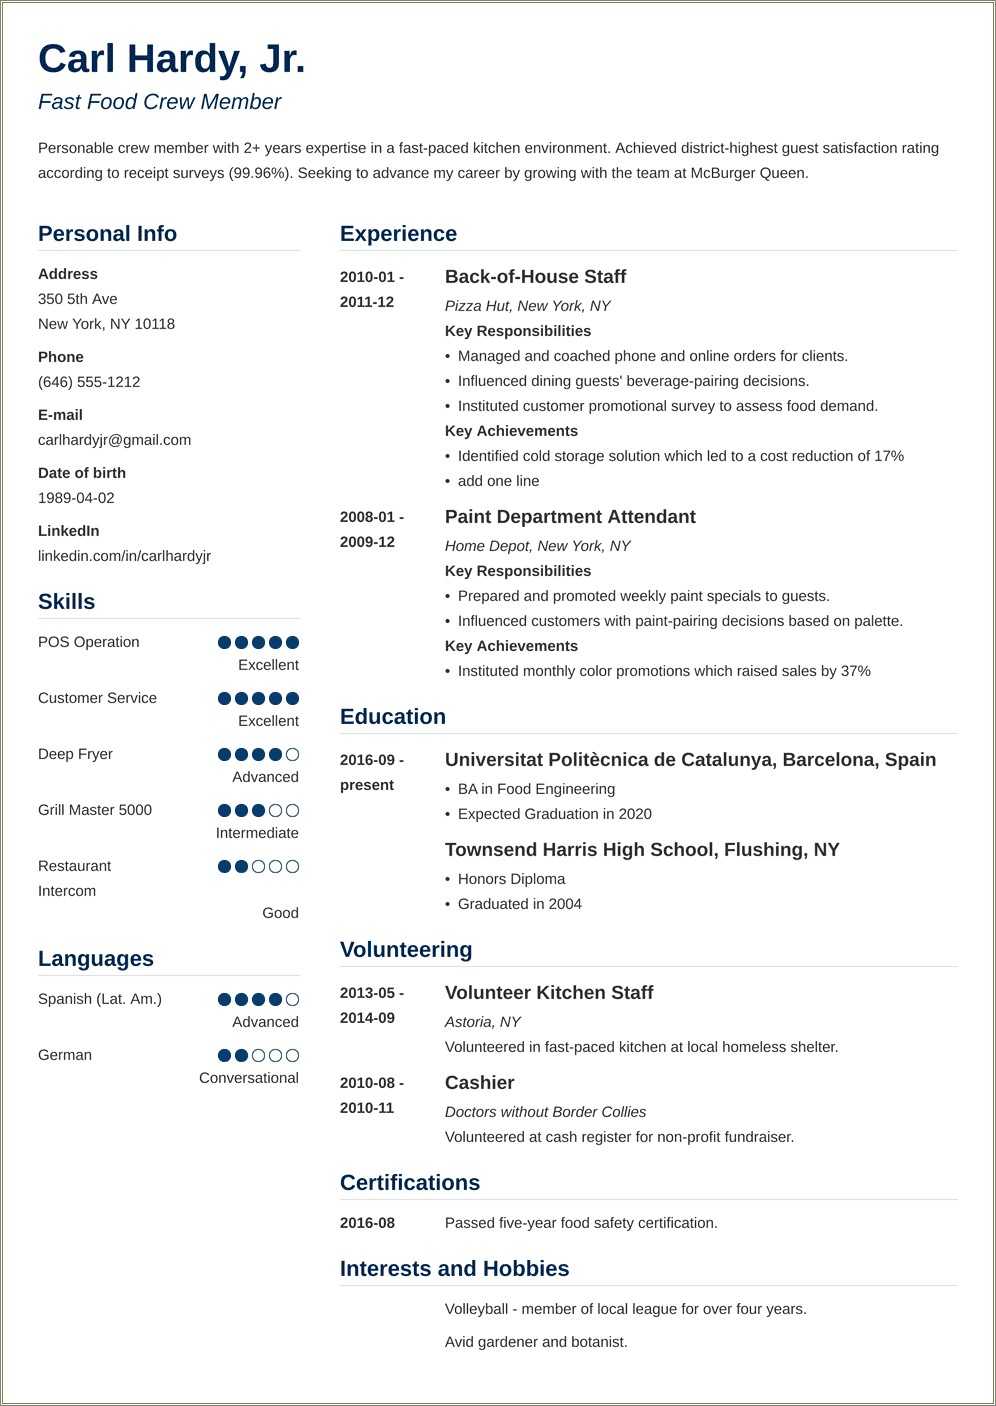 Resume Fast Food Restaurant No Experience